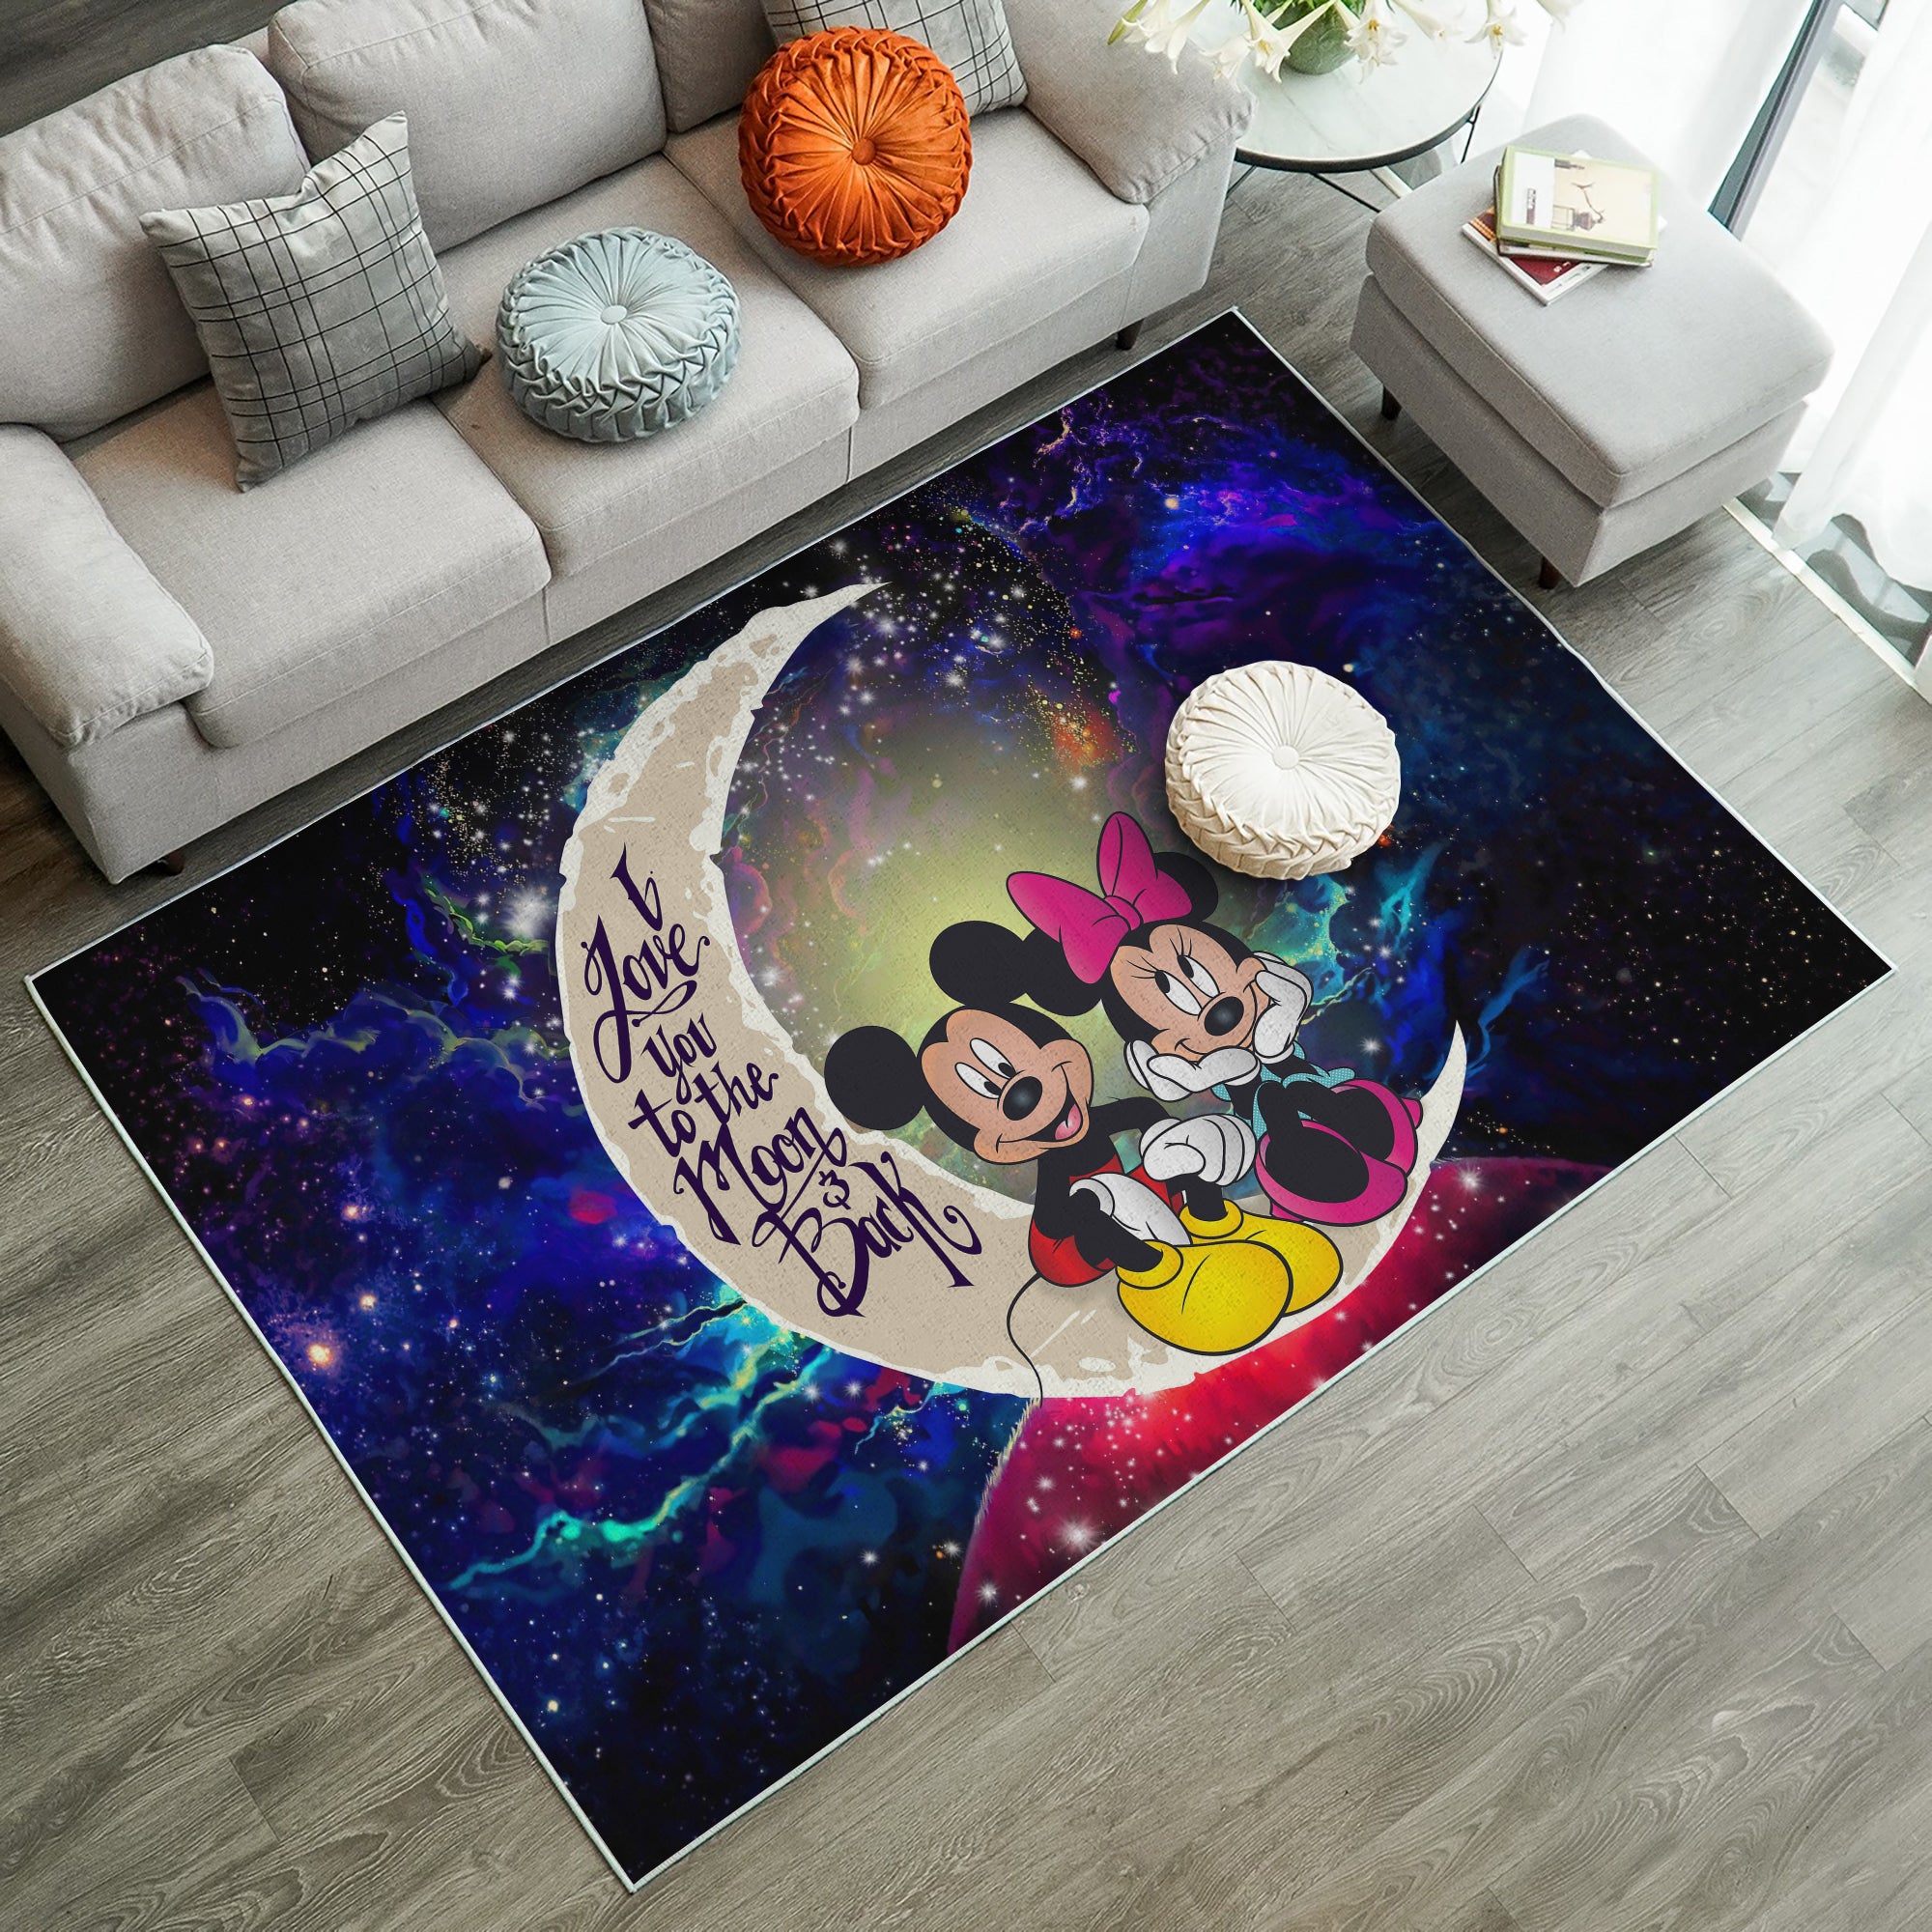 Mice Couple Love You To The Moon Galaxy Carpet Rug Home Room Decor